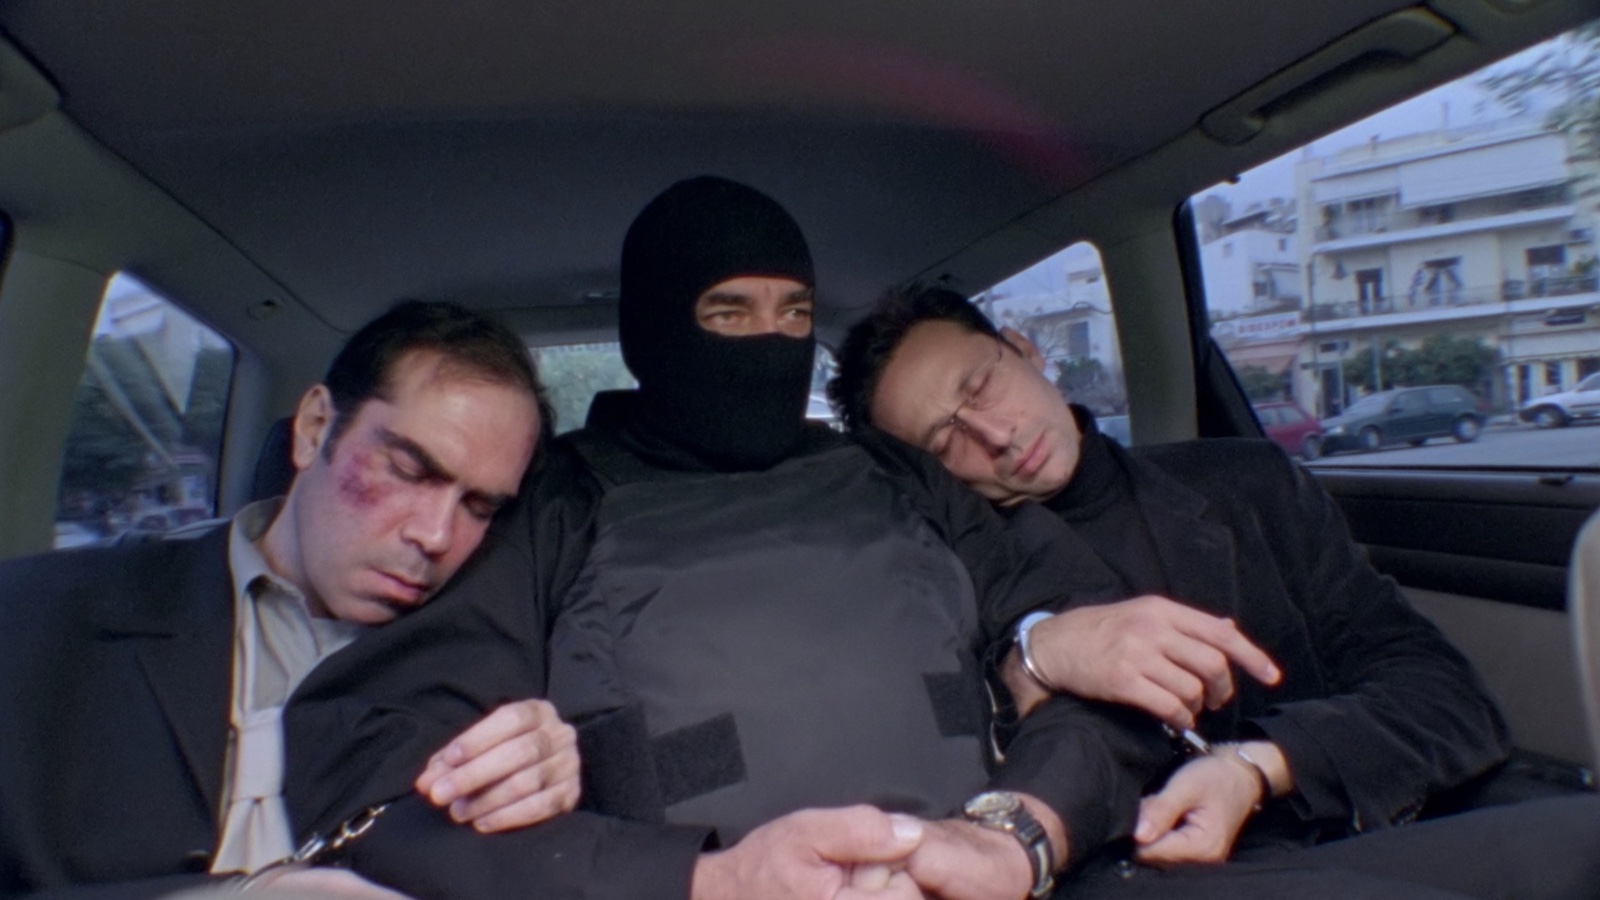 Three men sit in the back of a car, handcuffed to each other, the middle man wearing a bulletproof vest and ski mask